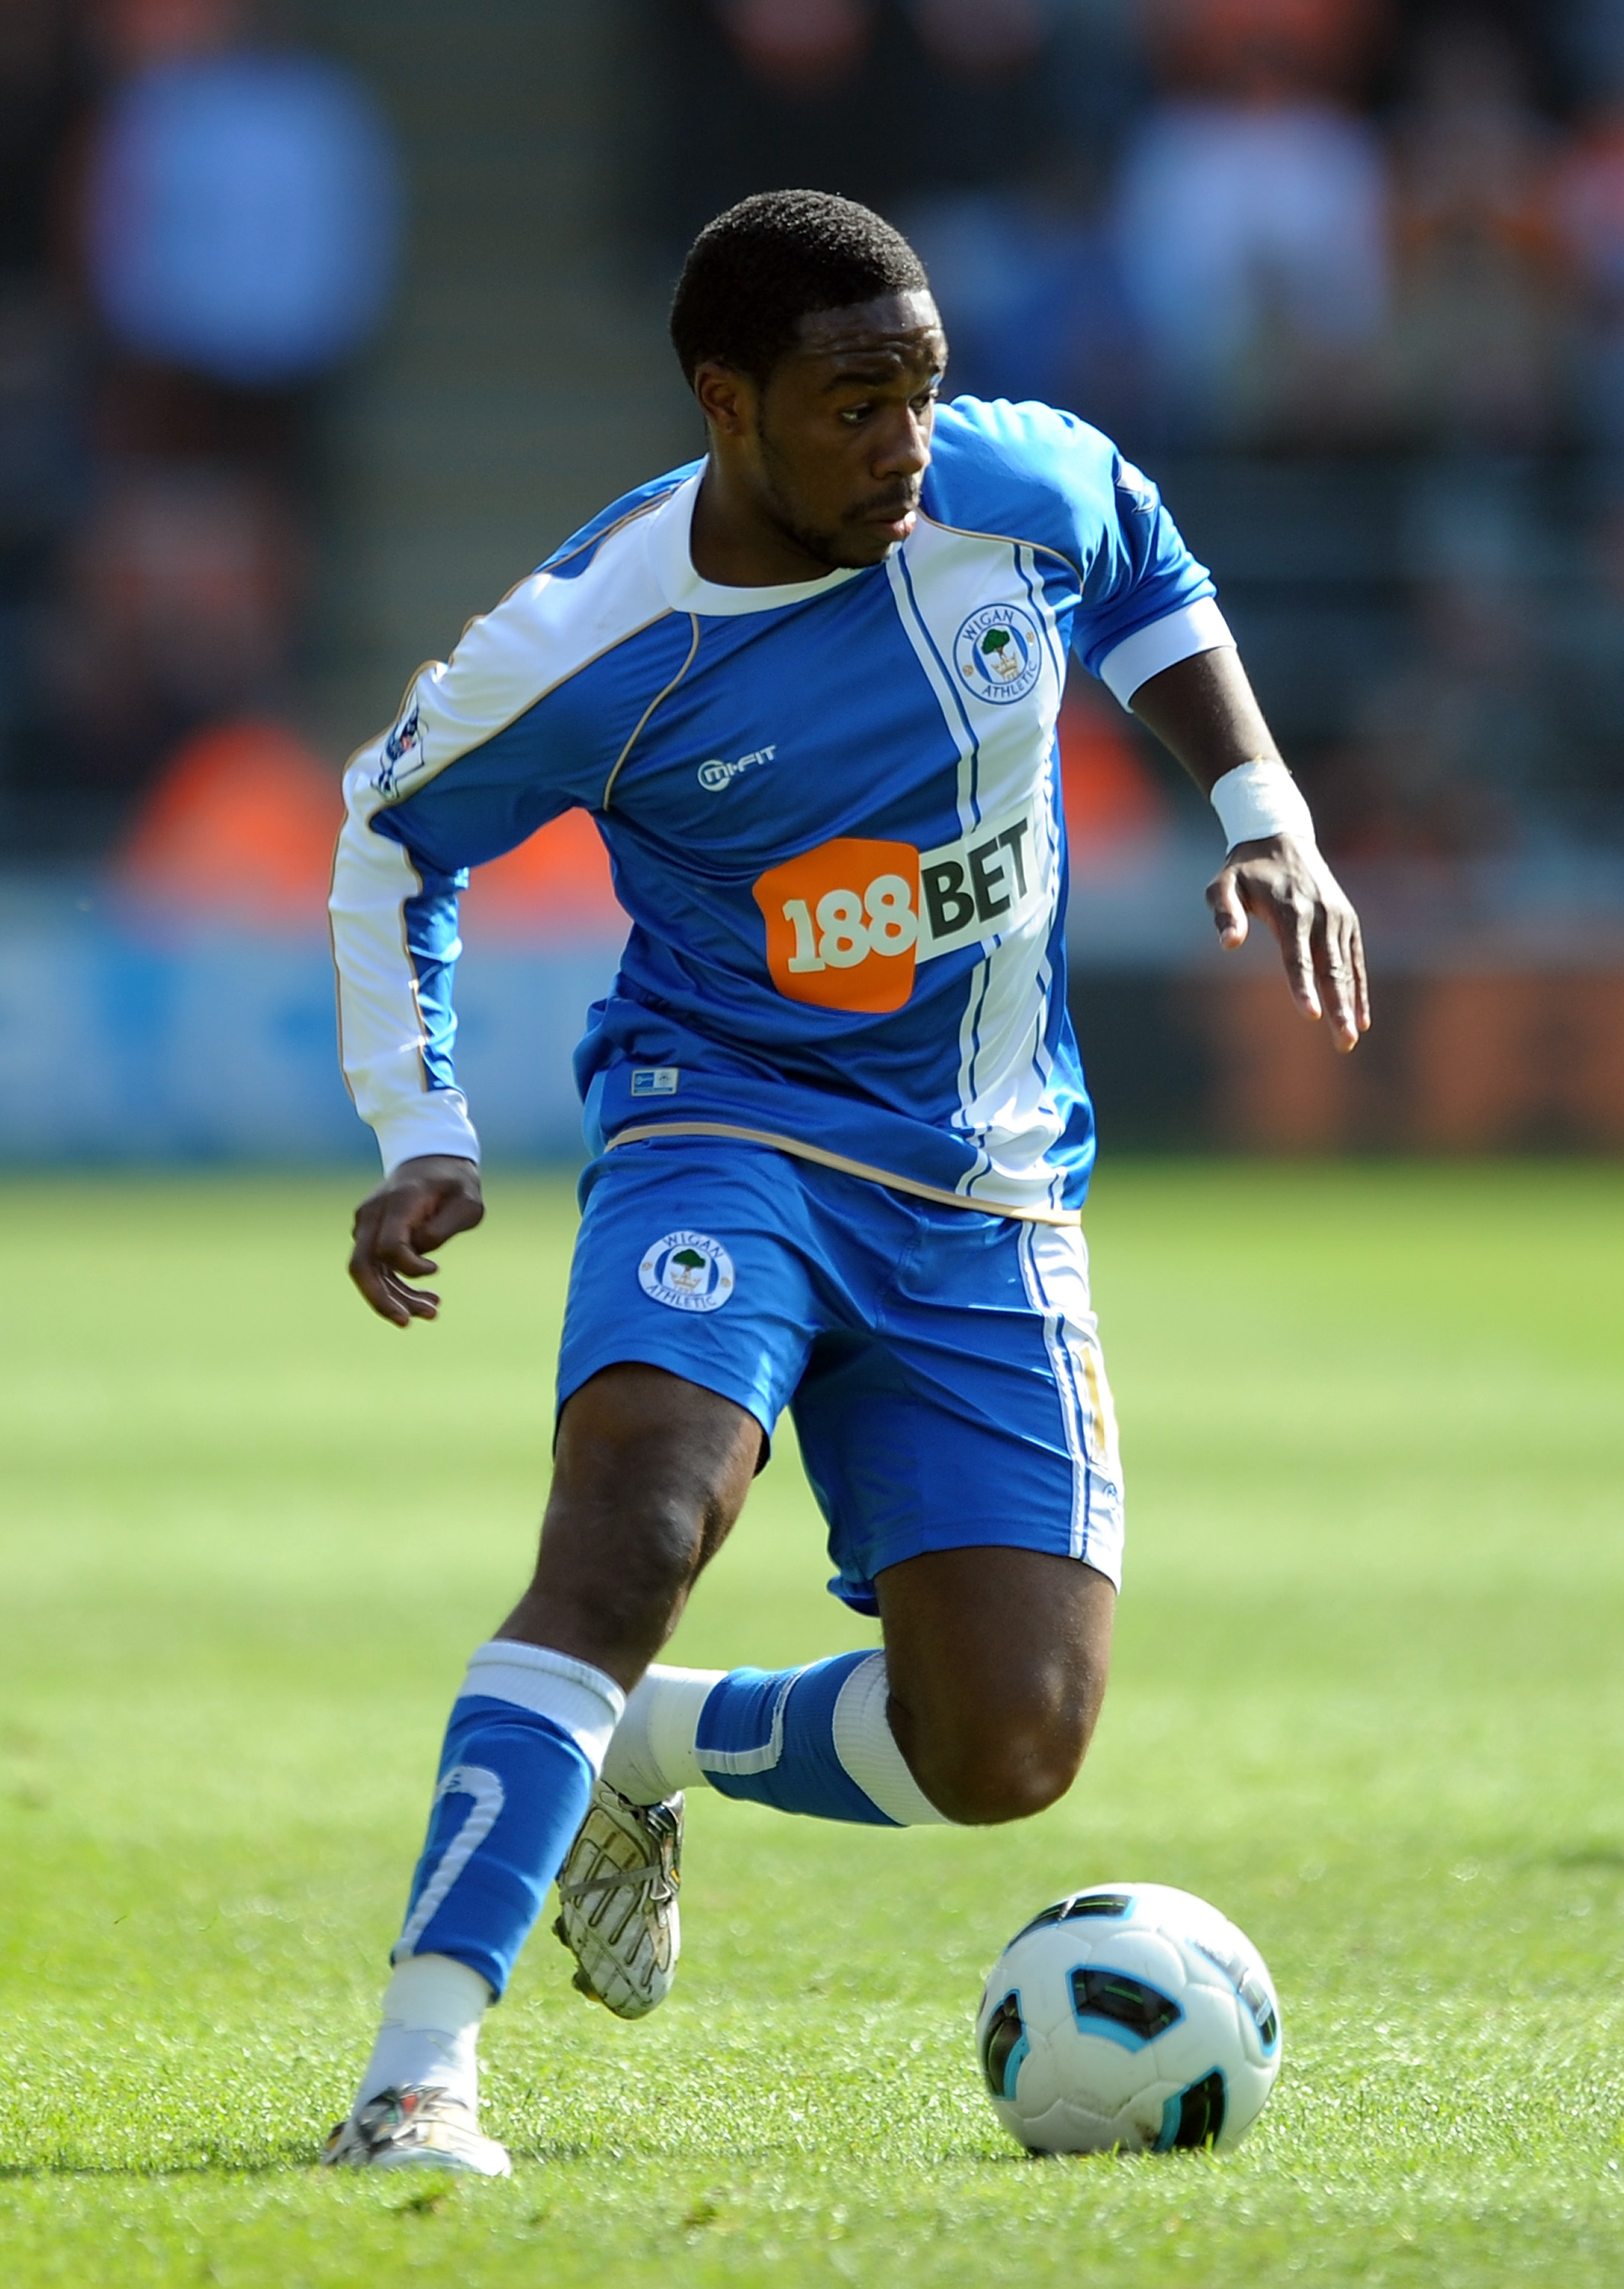 BLACKPOOL, ENGLAND - APRIL 16:  Charles N'Zogbia of Wigan Athletic in action during the Barclays Premier League match between Blackpool and Wigan Athletic at Bloomfield Road on April 16, 2011 in Blackpool, England.  (Photo by Chris Brunskill/Getty Images)